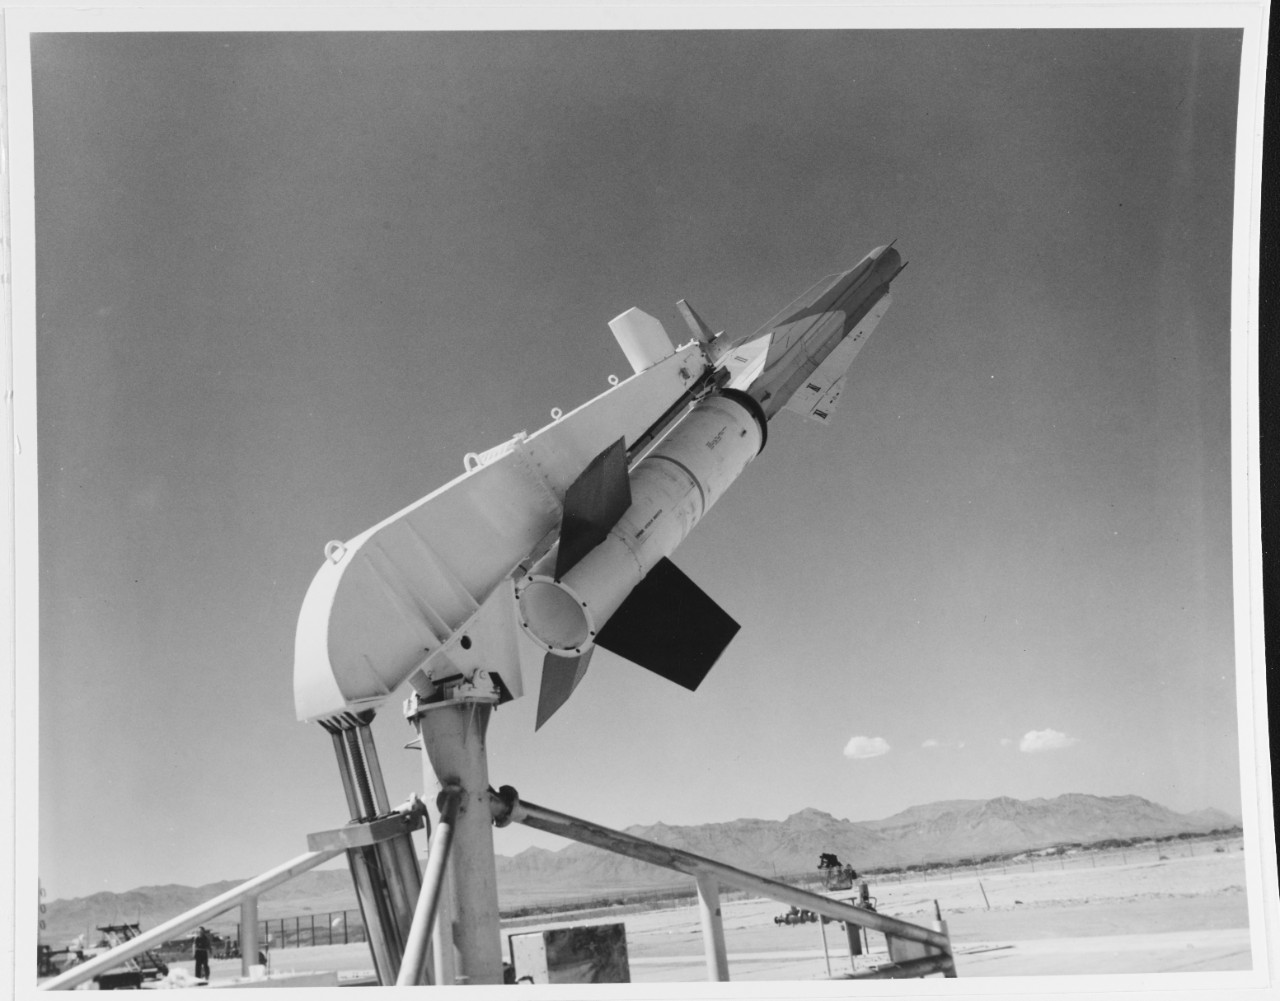 "TYPHON" Missile (Long Range) at the White Sands Missile Range. It was fired March 23, 1961